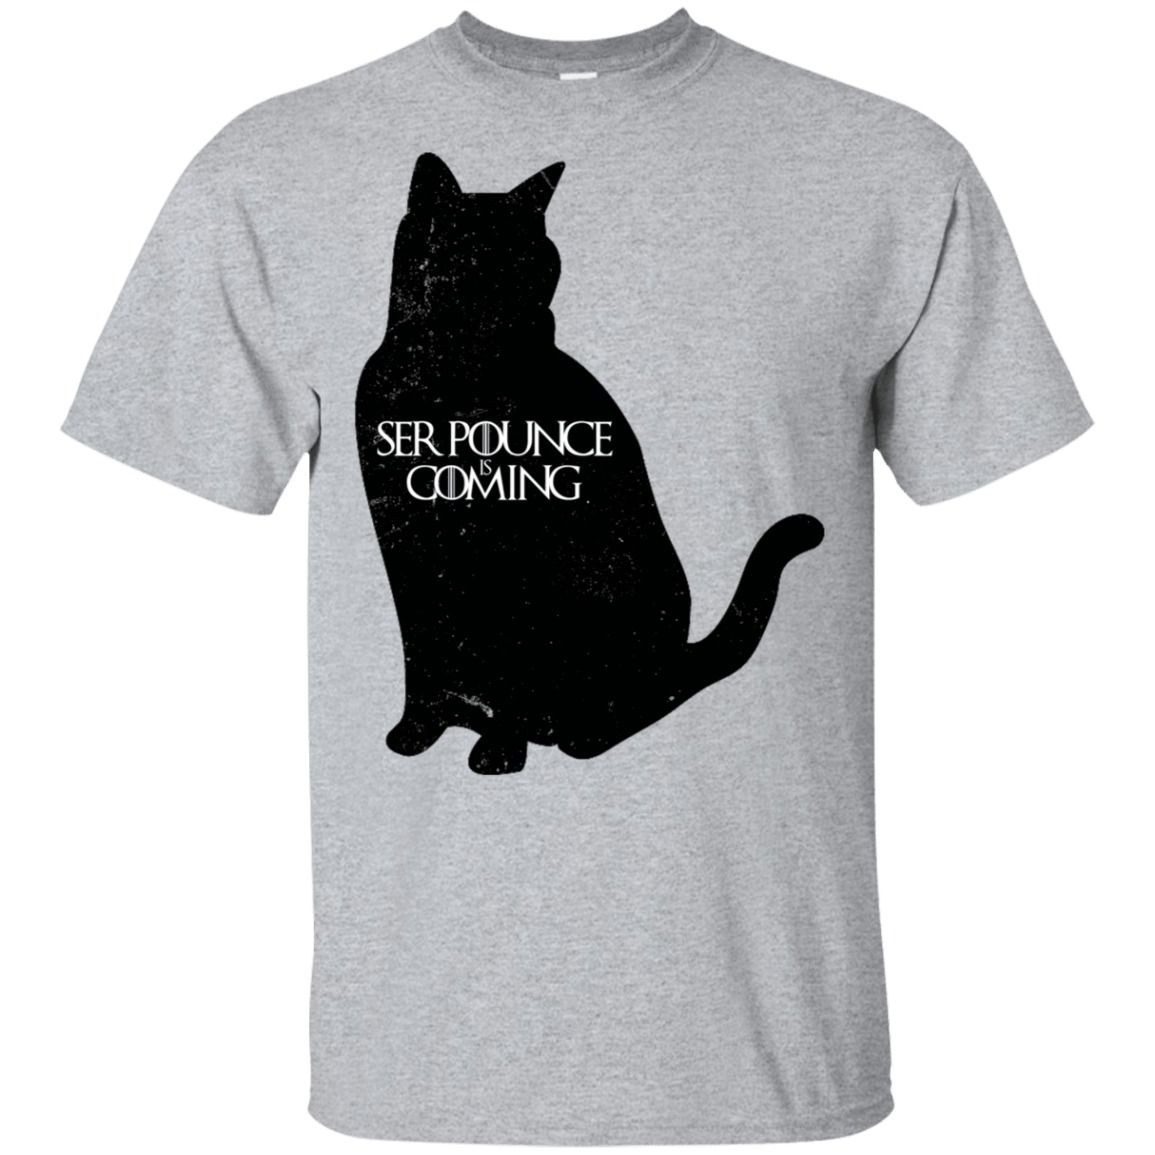 T-Shirts Sport Grey / S Ser Pounce is Coming T-Shirt